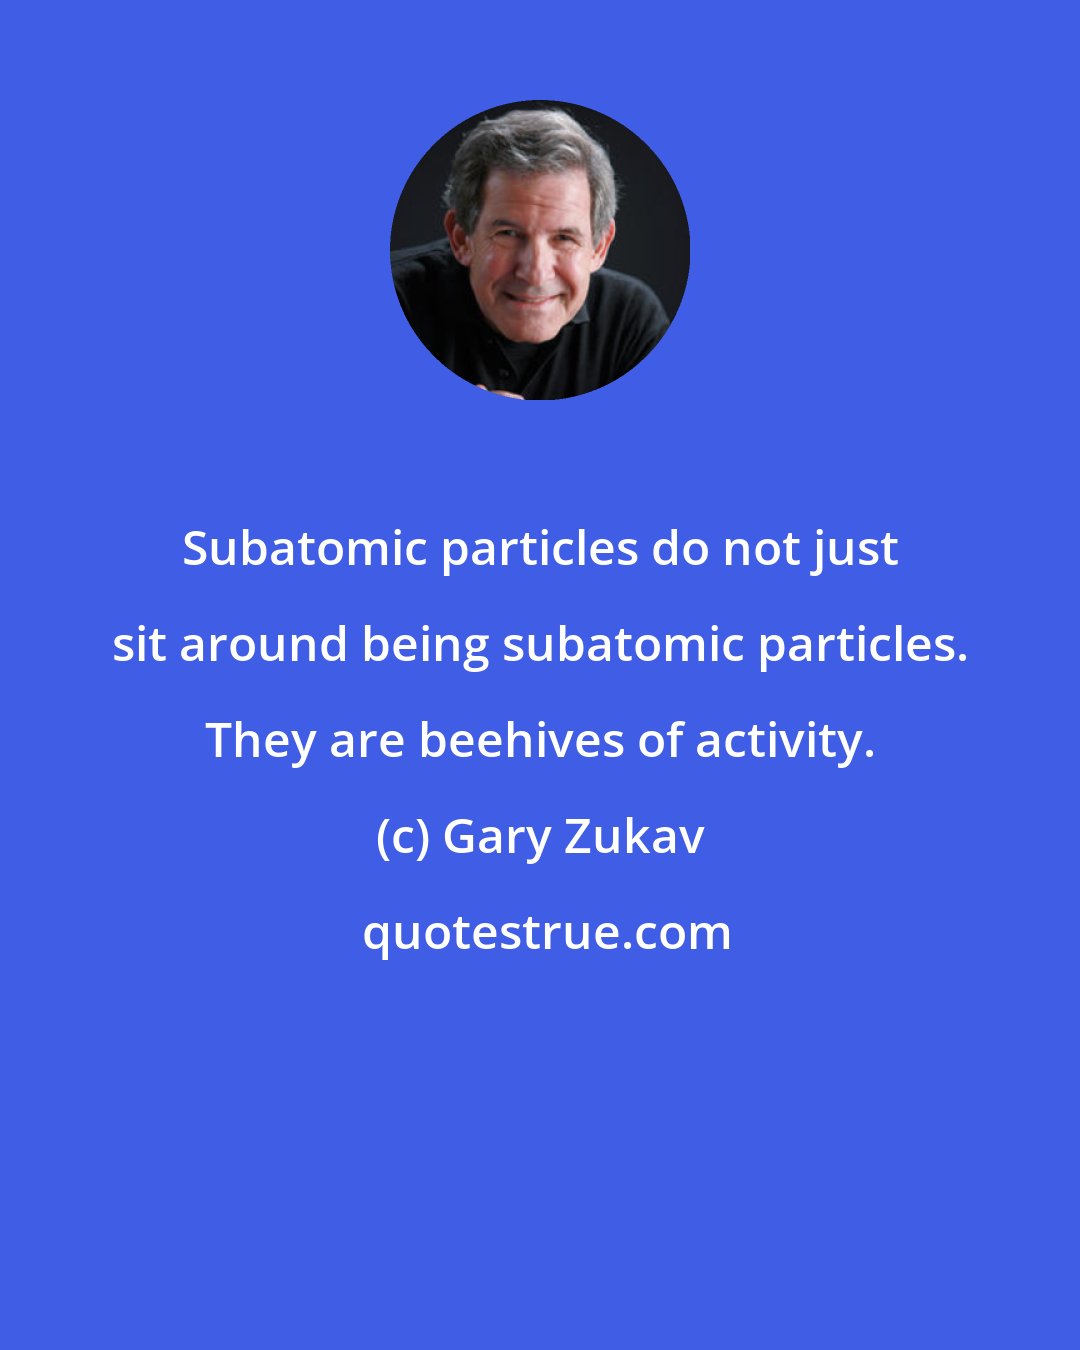 Gary Zukav: Subatomic particles do not just sit around being subatomic particles. They are beehives of activity.